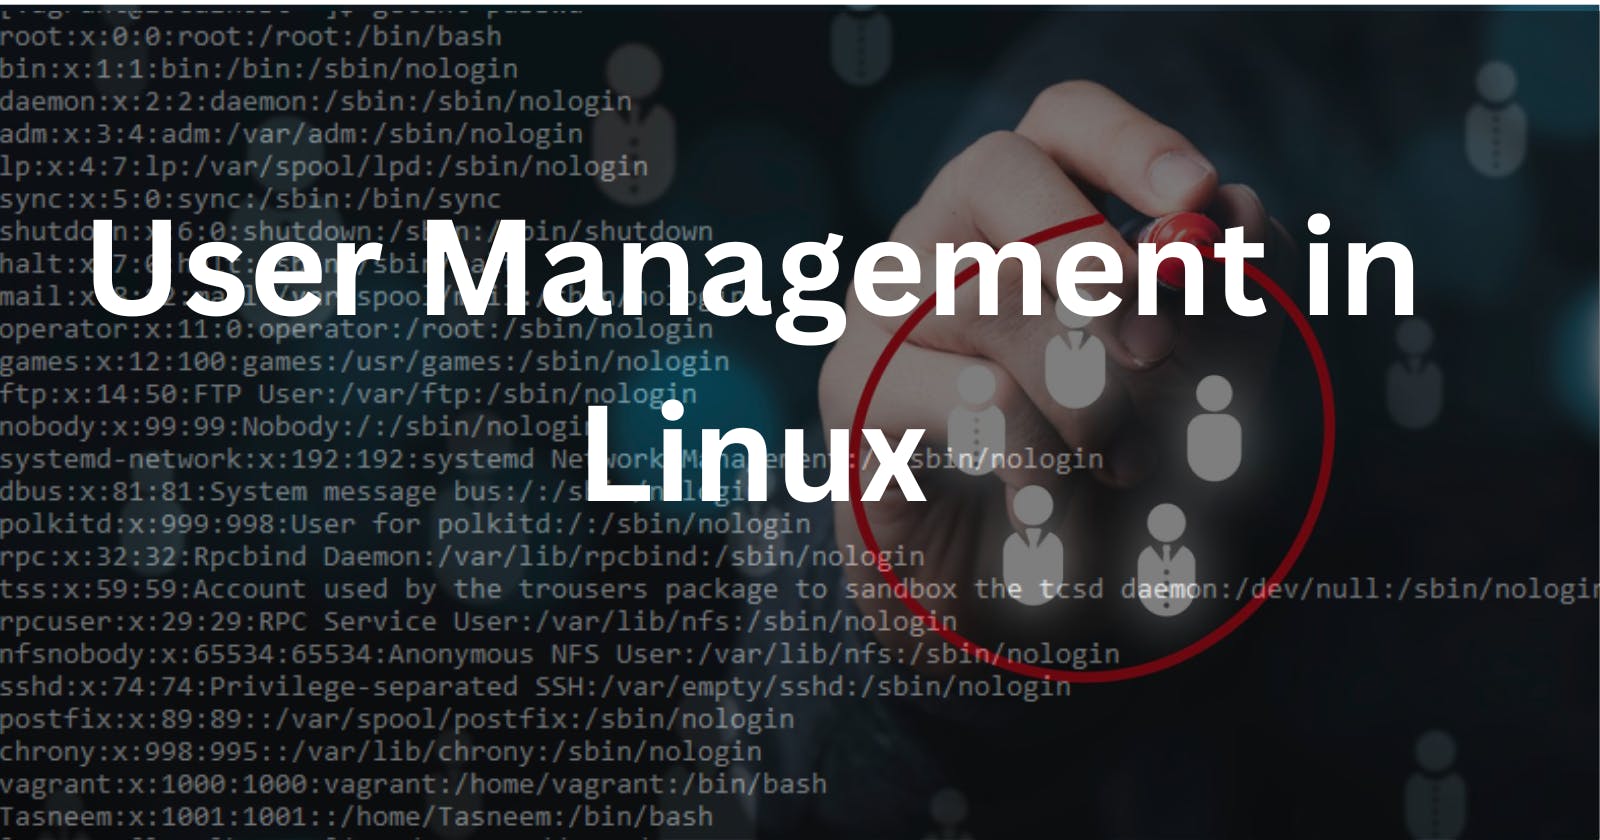 Managing Users in Linux: A DevOps Guide 🐧